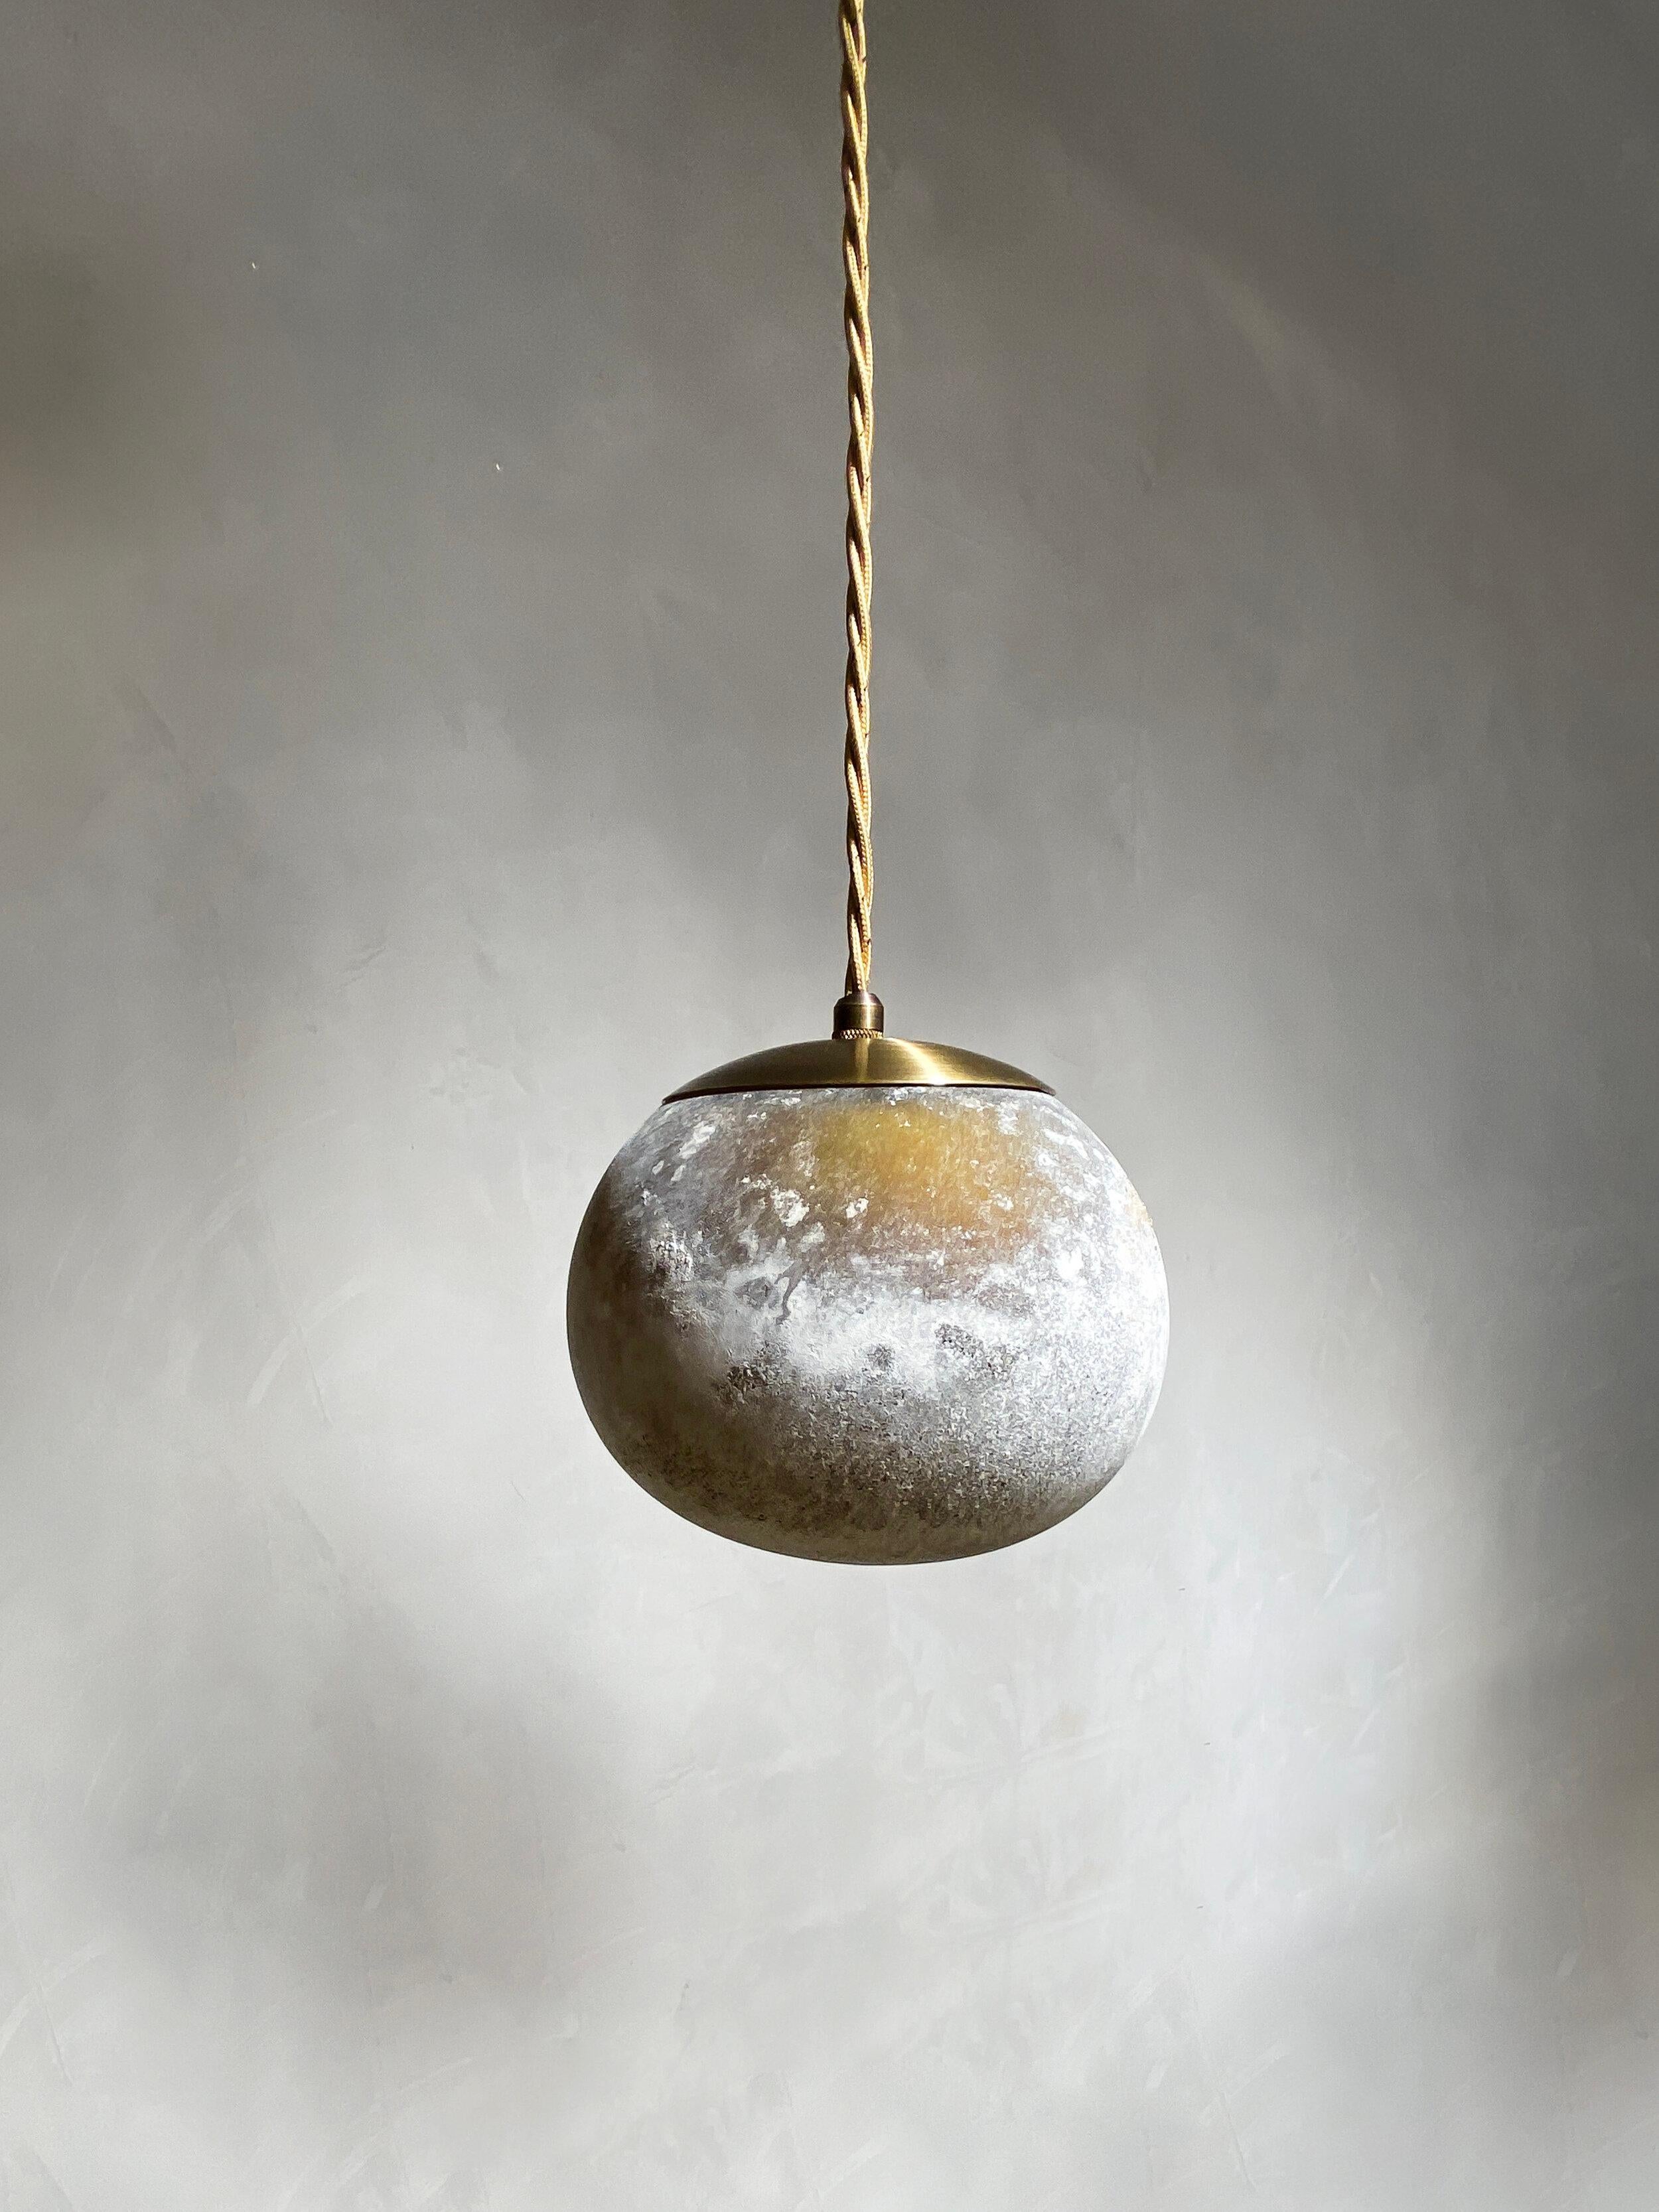 Salty Pendant Ball 18 by Contain
Dimensions: Ø 18 x H 100 cm (custom length).
Materials: Blown glass from local production with salty process and brass structure.

Available in different finishes and dimensions (14 cm Ø / 18 cm Ø / 20 cm Øx (custom